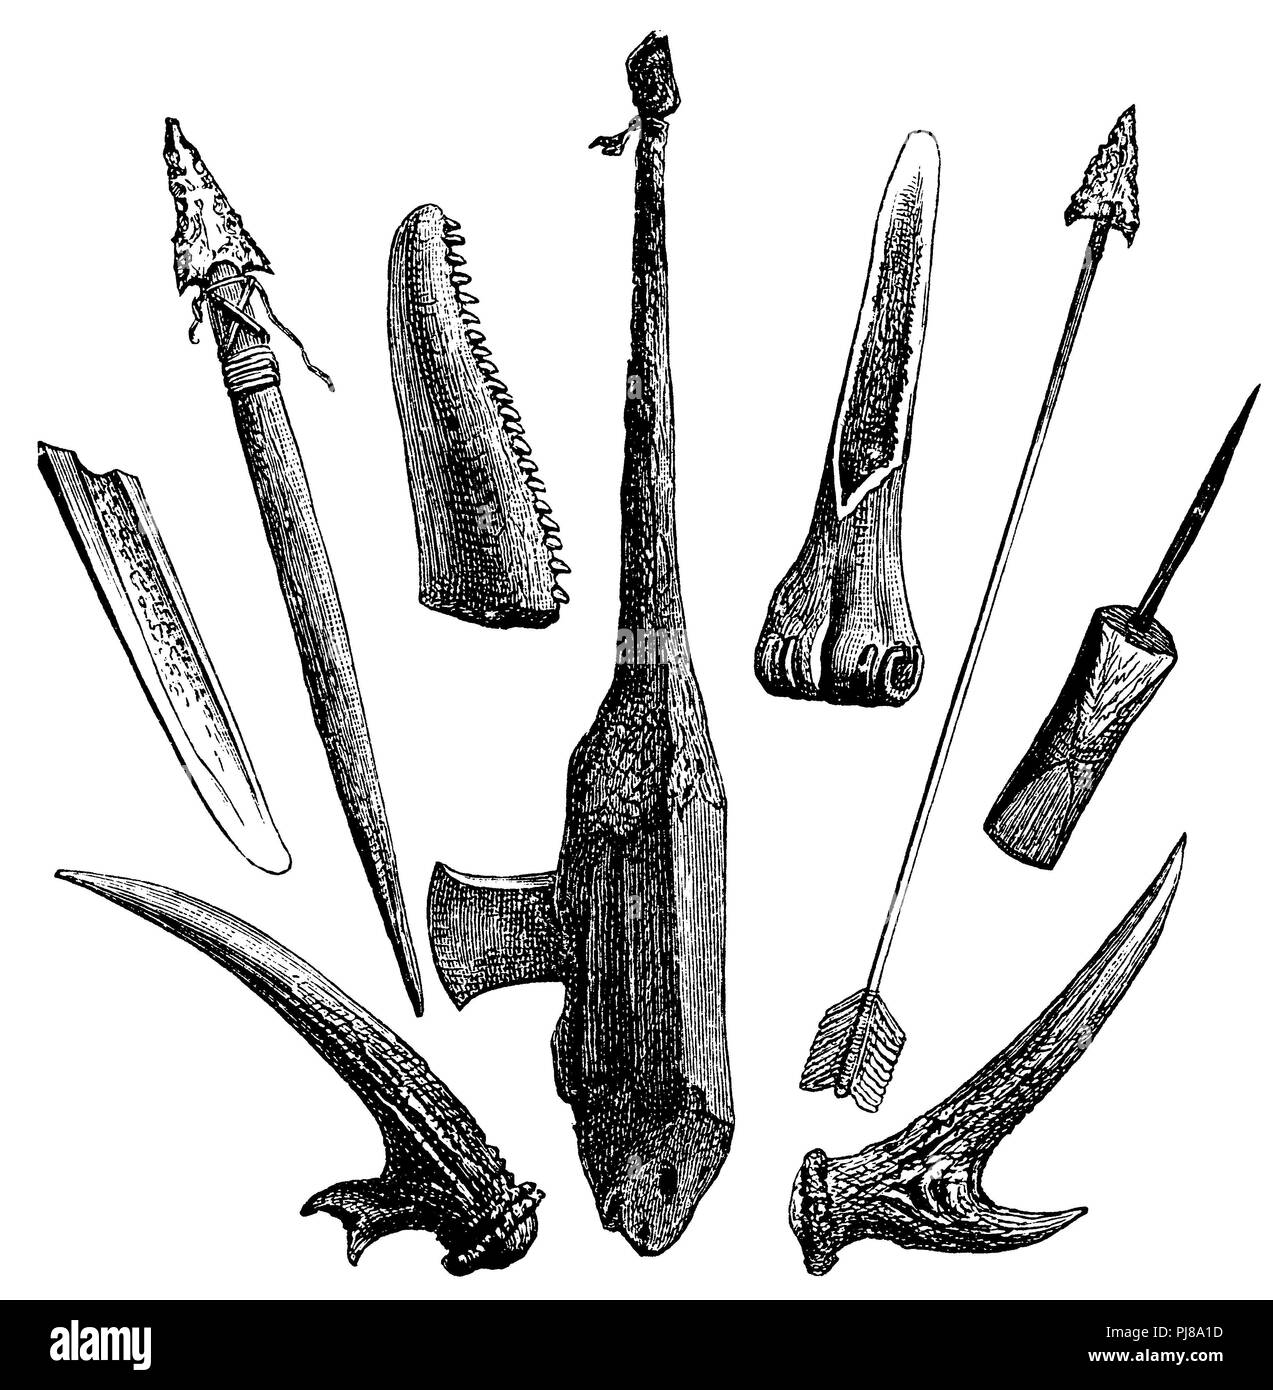 Bony weapons and devices of the Tierra del Fuego (Hagenbeck collection, Hamburg),   1894 Stock Photo